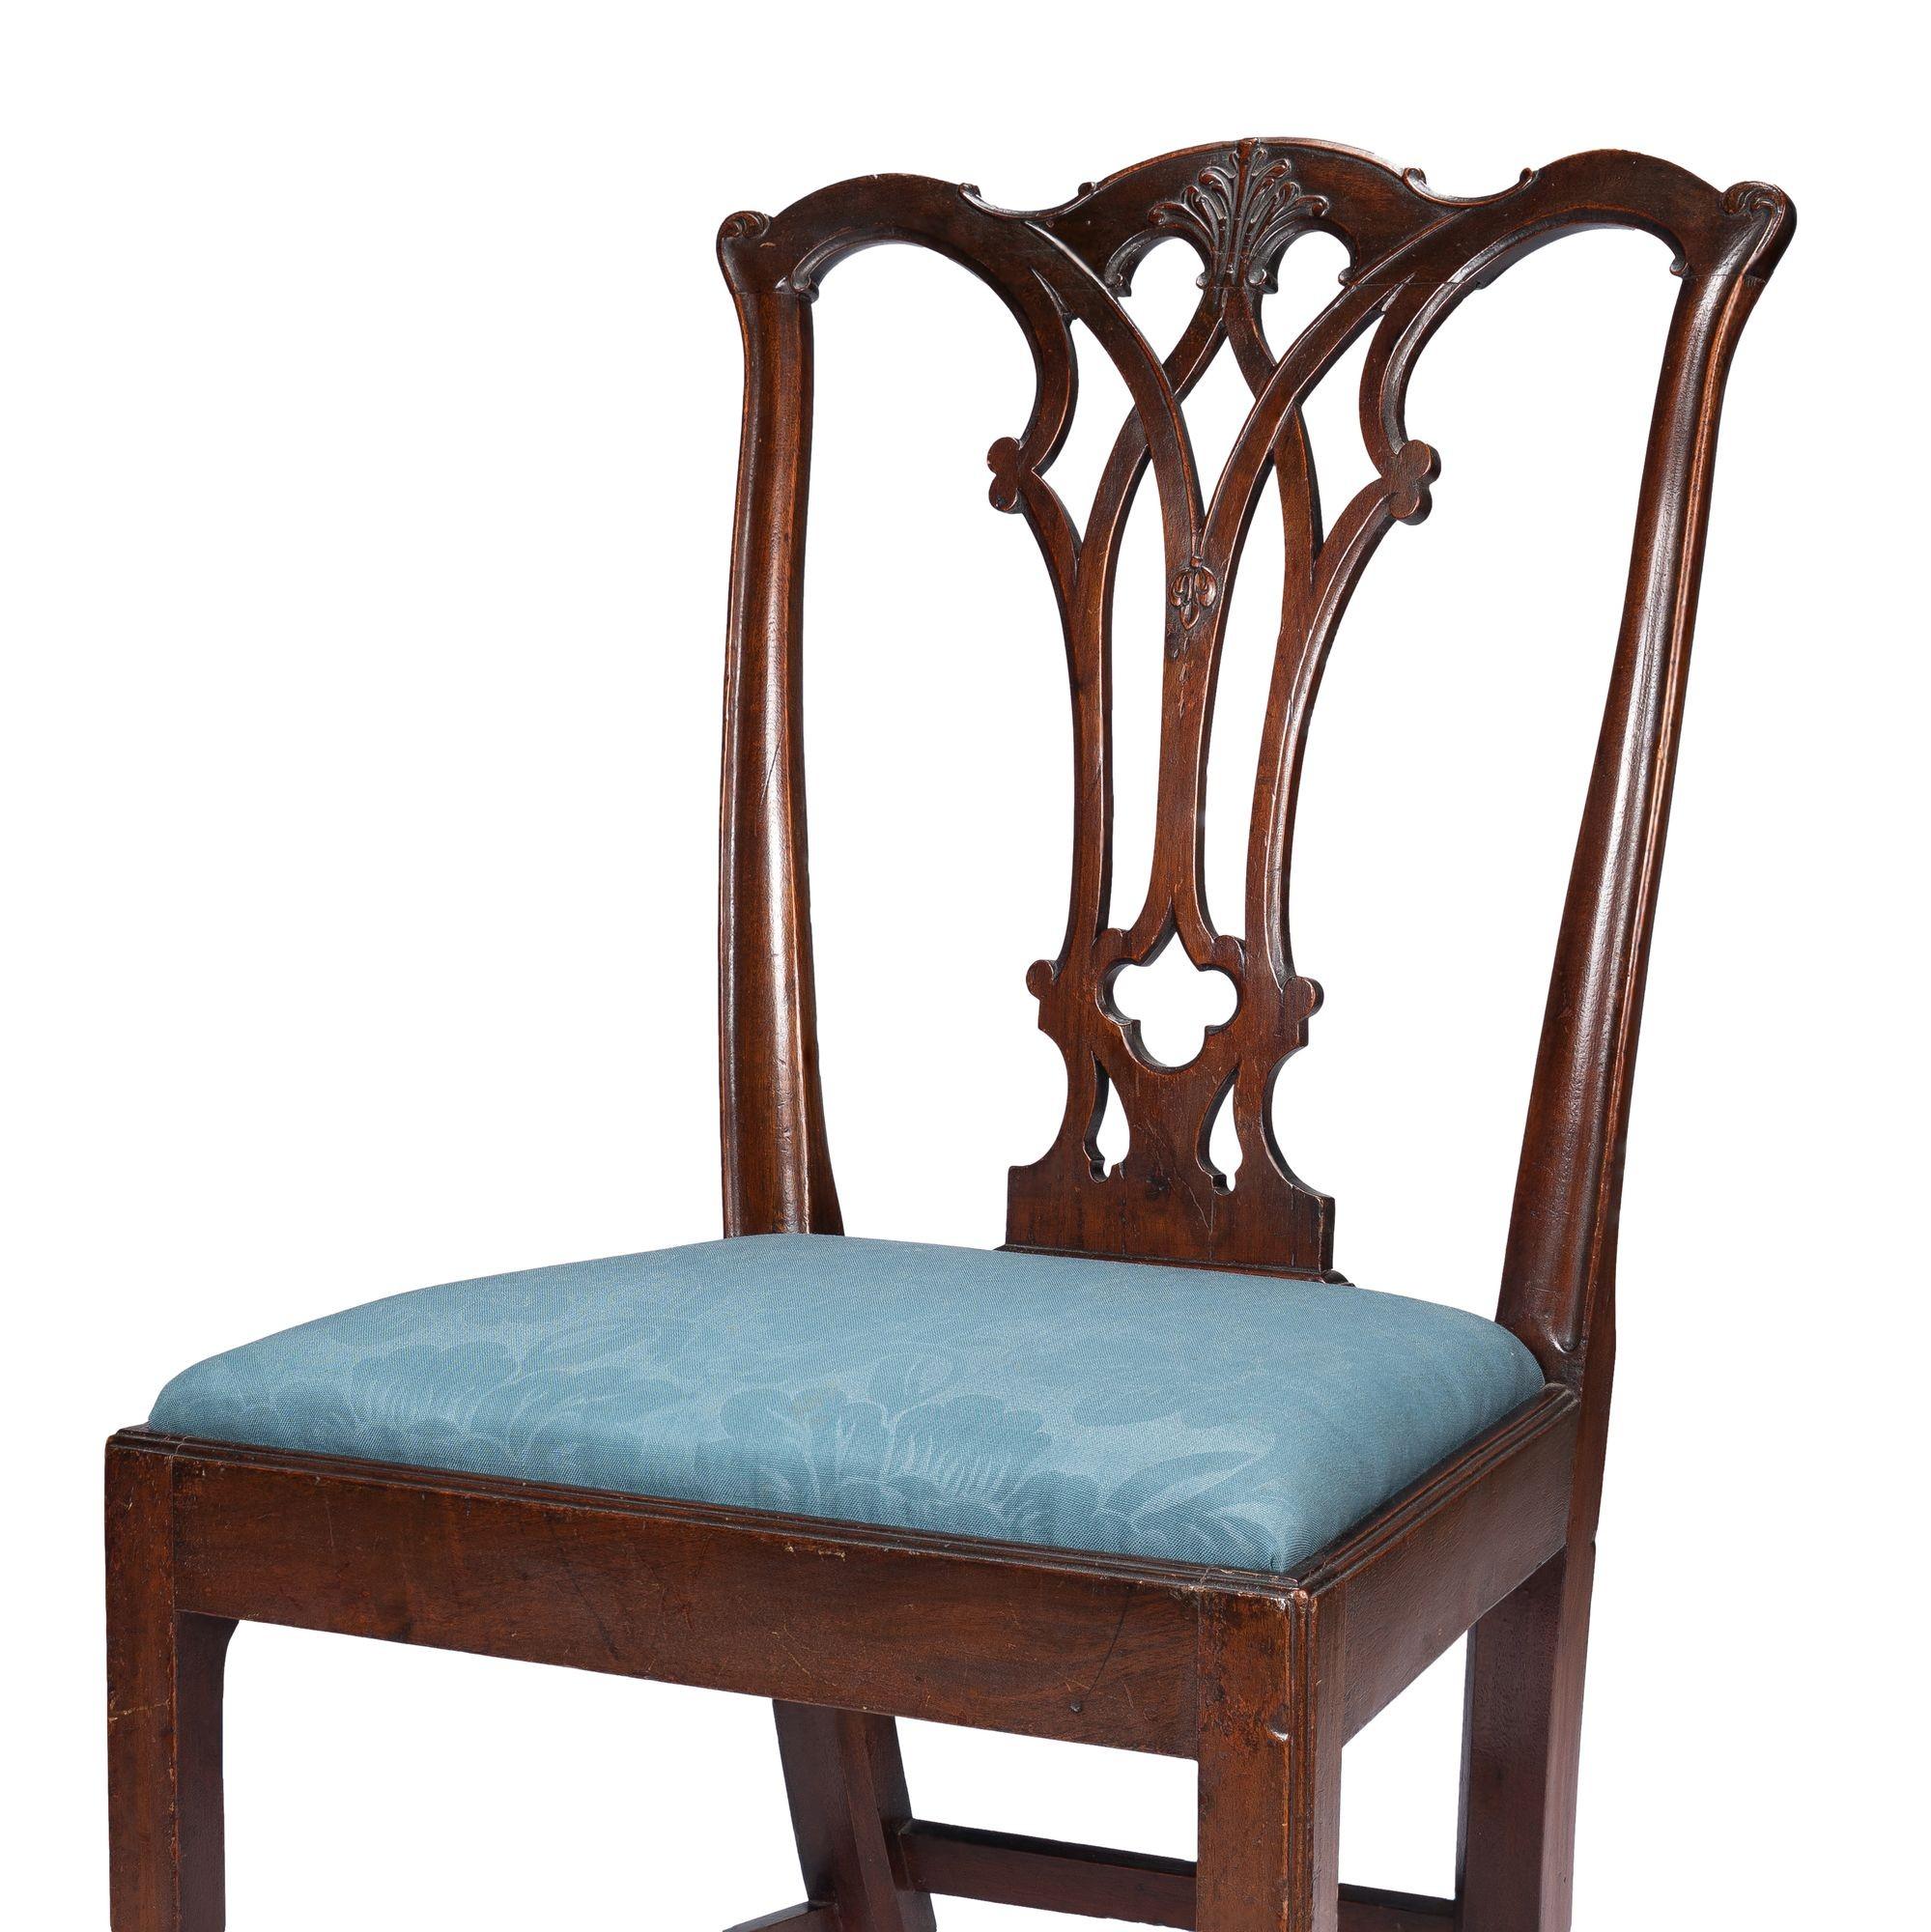 Philadelphia Chippendale Mahogany Slip Seat Side Chair by Thomas Tuft, 1770 For Sale 4